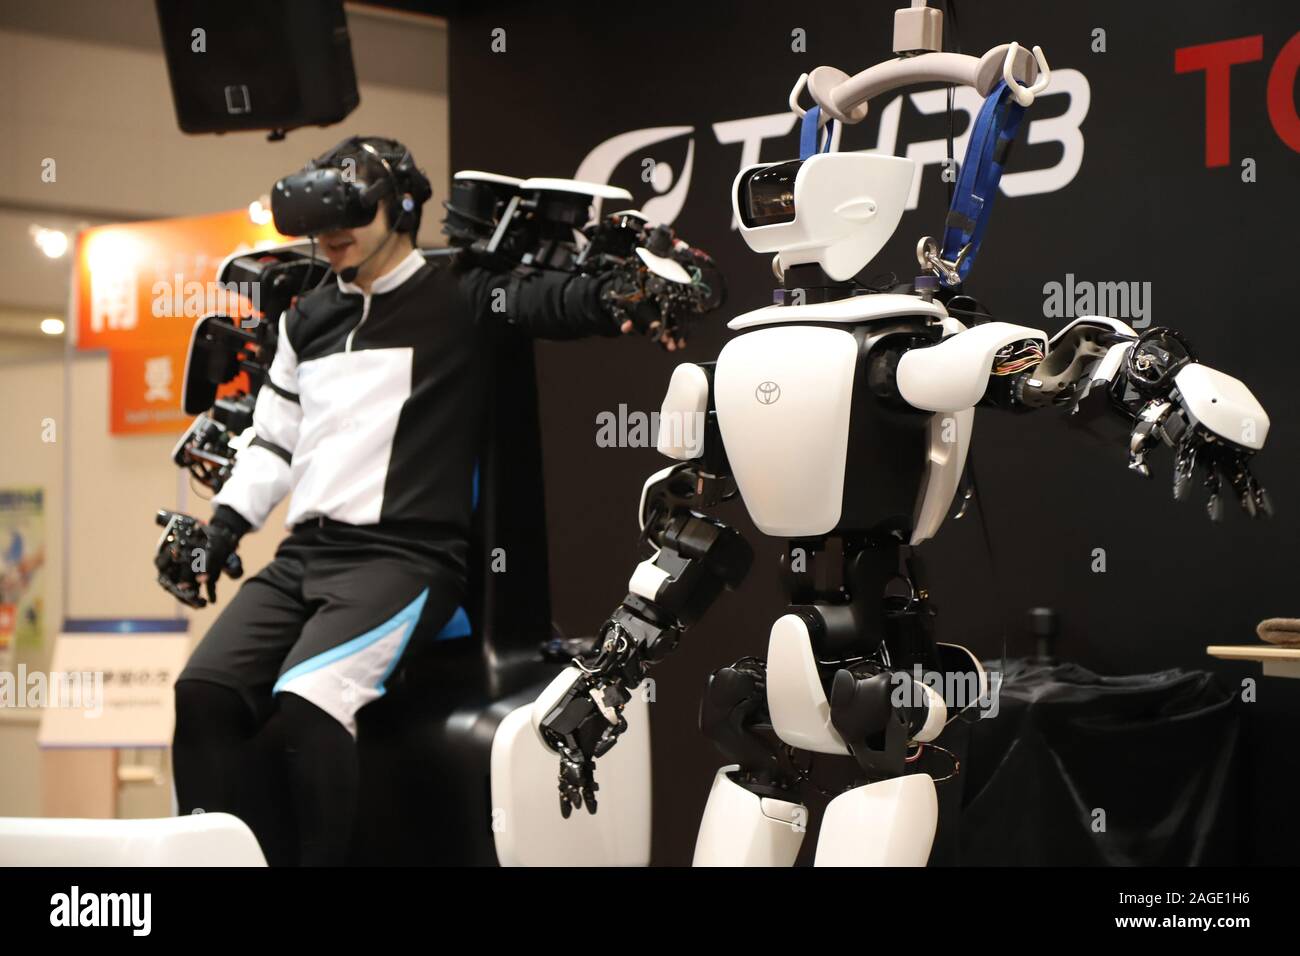 Tokyo, Japan. 18th Dec, 2019. Japan's giant Toyota Motor's humanoid robot T-HR3 is synchronized with operator's motion by master-slave control system at the International Robot Exhibition in Tokyo on